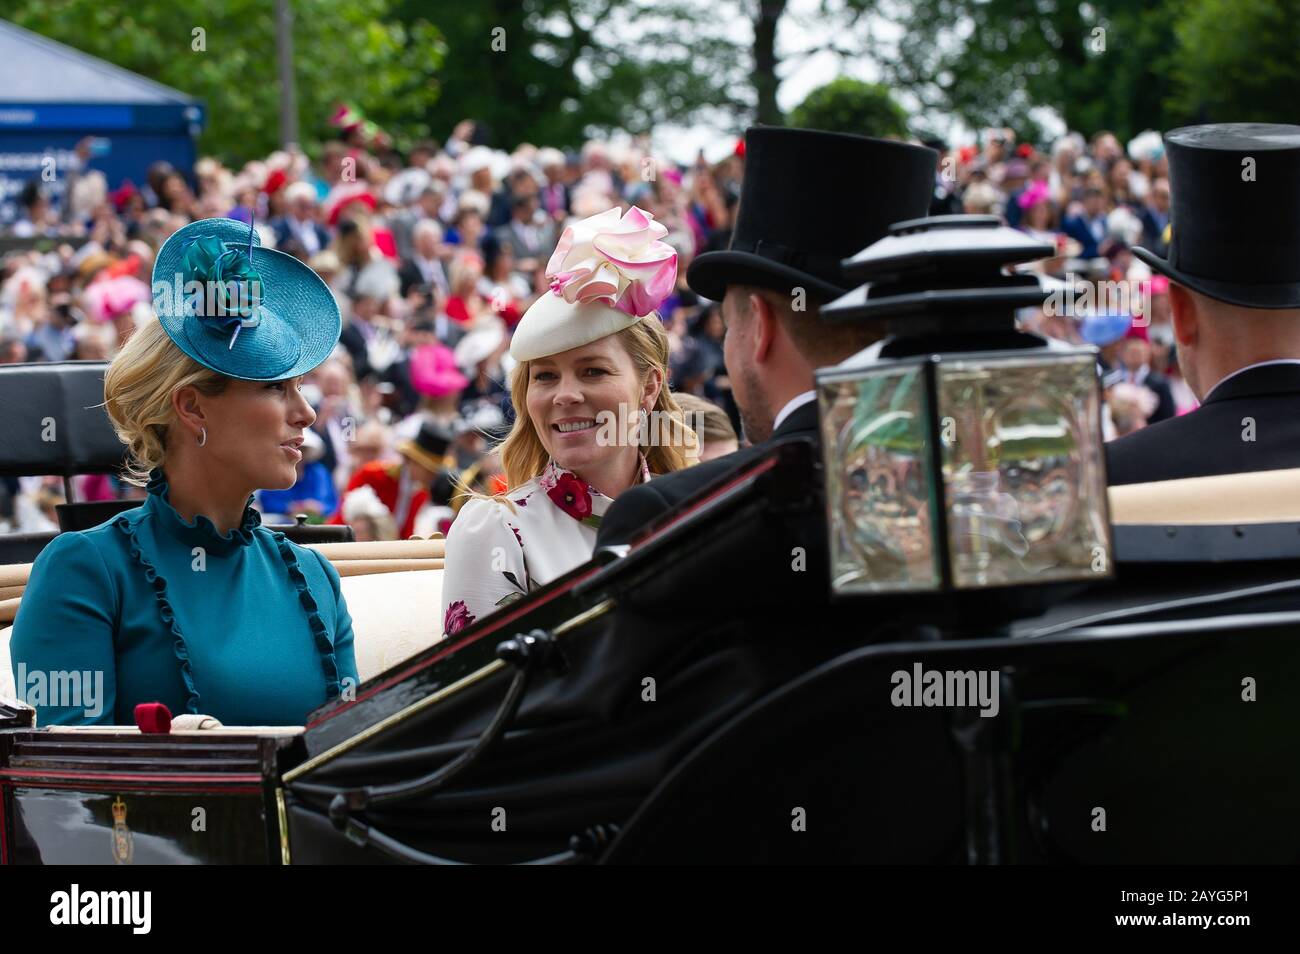 Royal Ascot Ladies Day, Ascot Racecourse, UK. 20th June, 2019. Zara Tindall, Autumn Phillips, Peter Phillps and Mike Tindall arrive a horse drawn carraige in the Royal Procession at Royal Ascot. Credit: Maureen McLean/Alamy Stock Photo